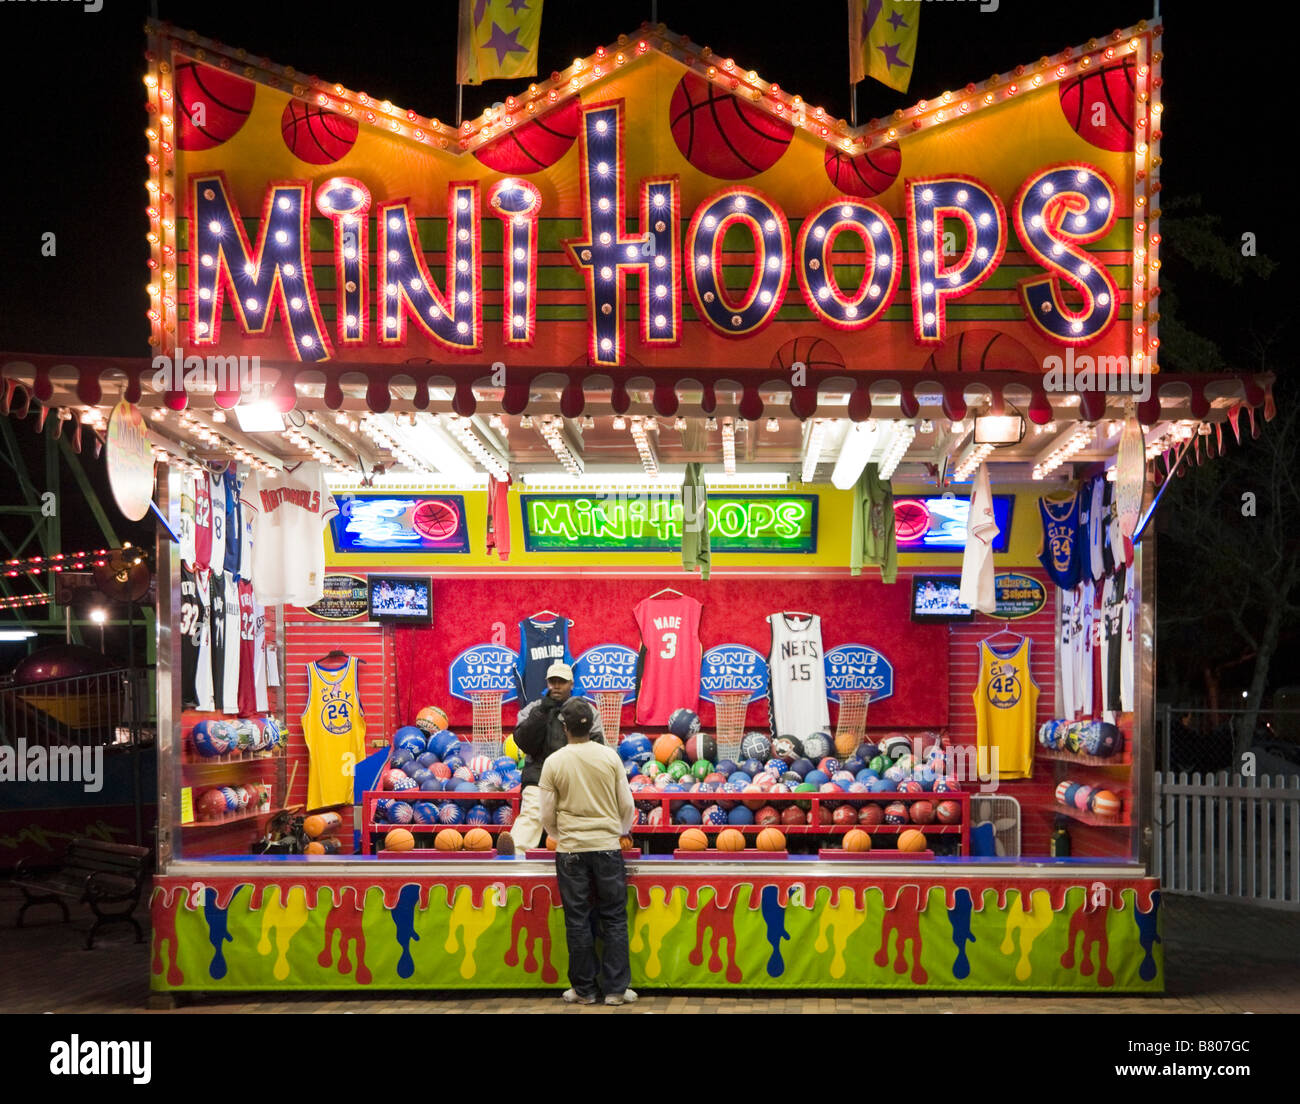 Fairground booth at night, Old Town Kissimmee on US 192, Kissimmee, Orlando, Central Florida, USA Stock Photo